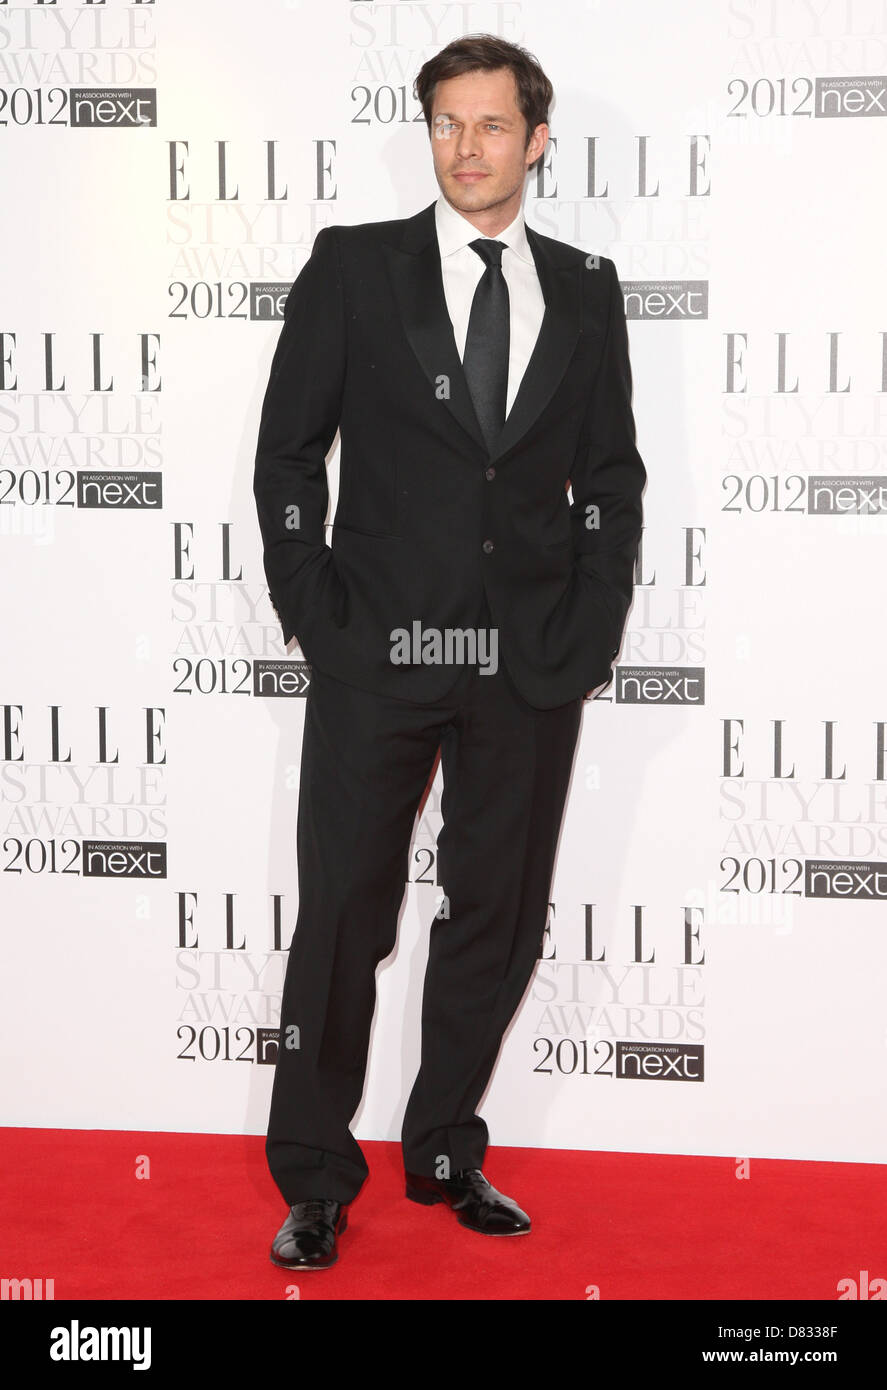 Paul Sculfor The Elle Style Awards 2012 held at The Savoy -Arrivals London, England - 13.02.12 Stock Photo